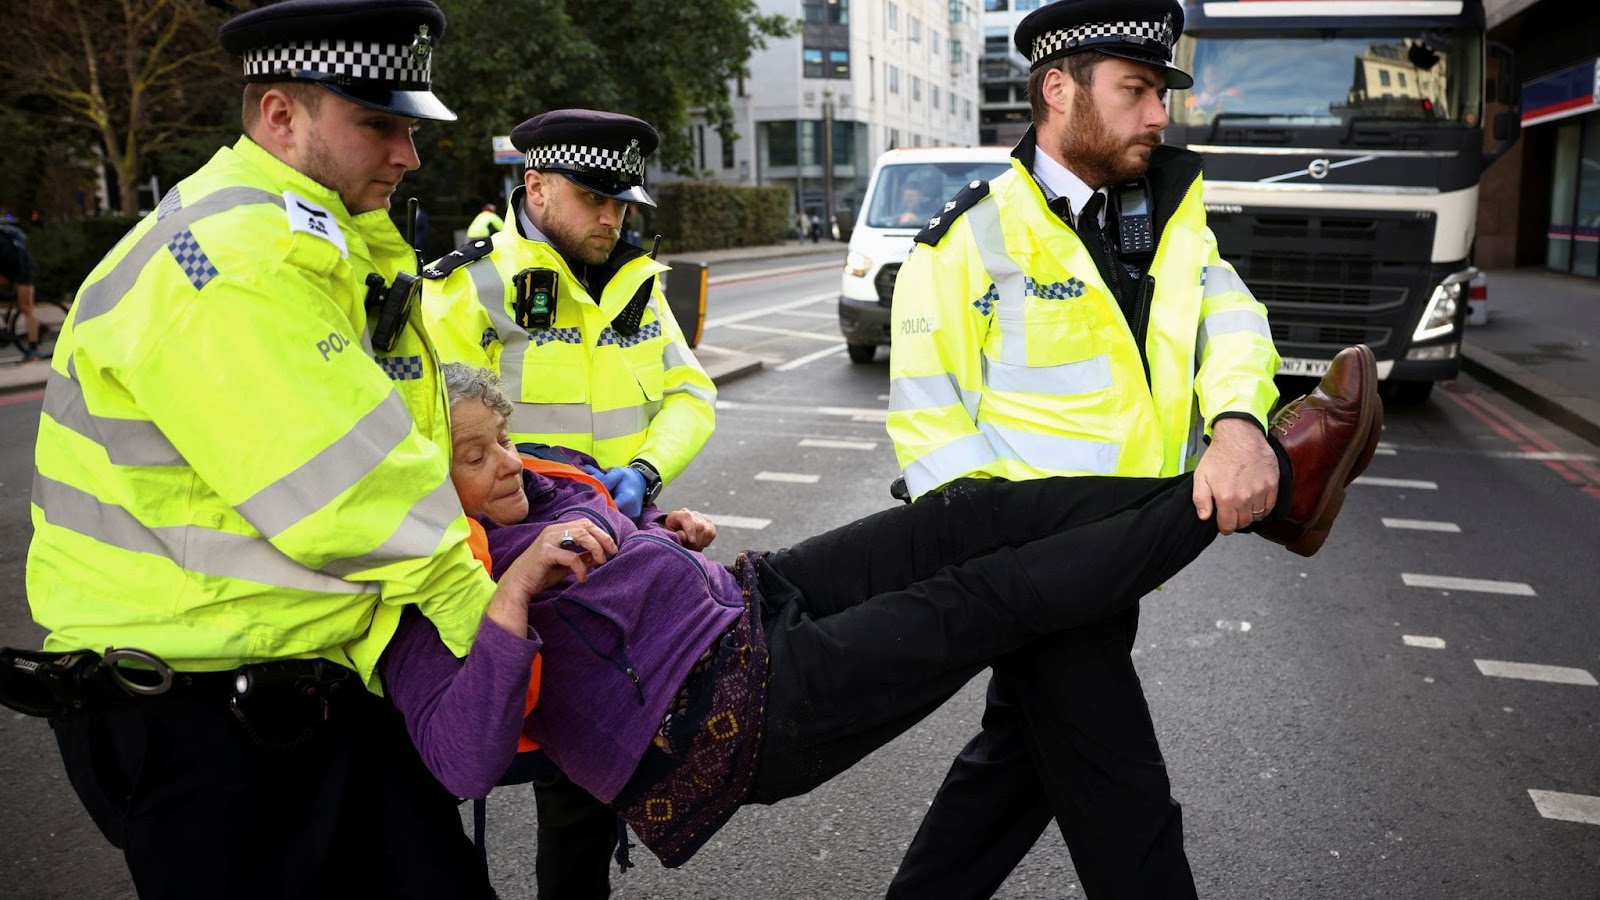 Marguerite is carried across a London road by three police officers.